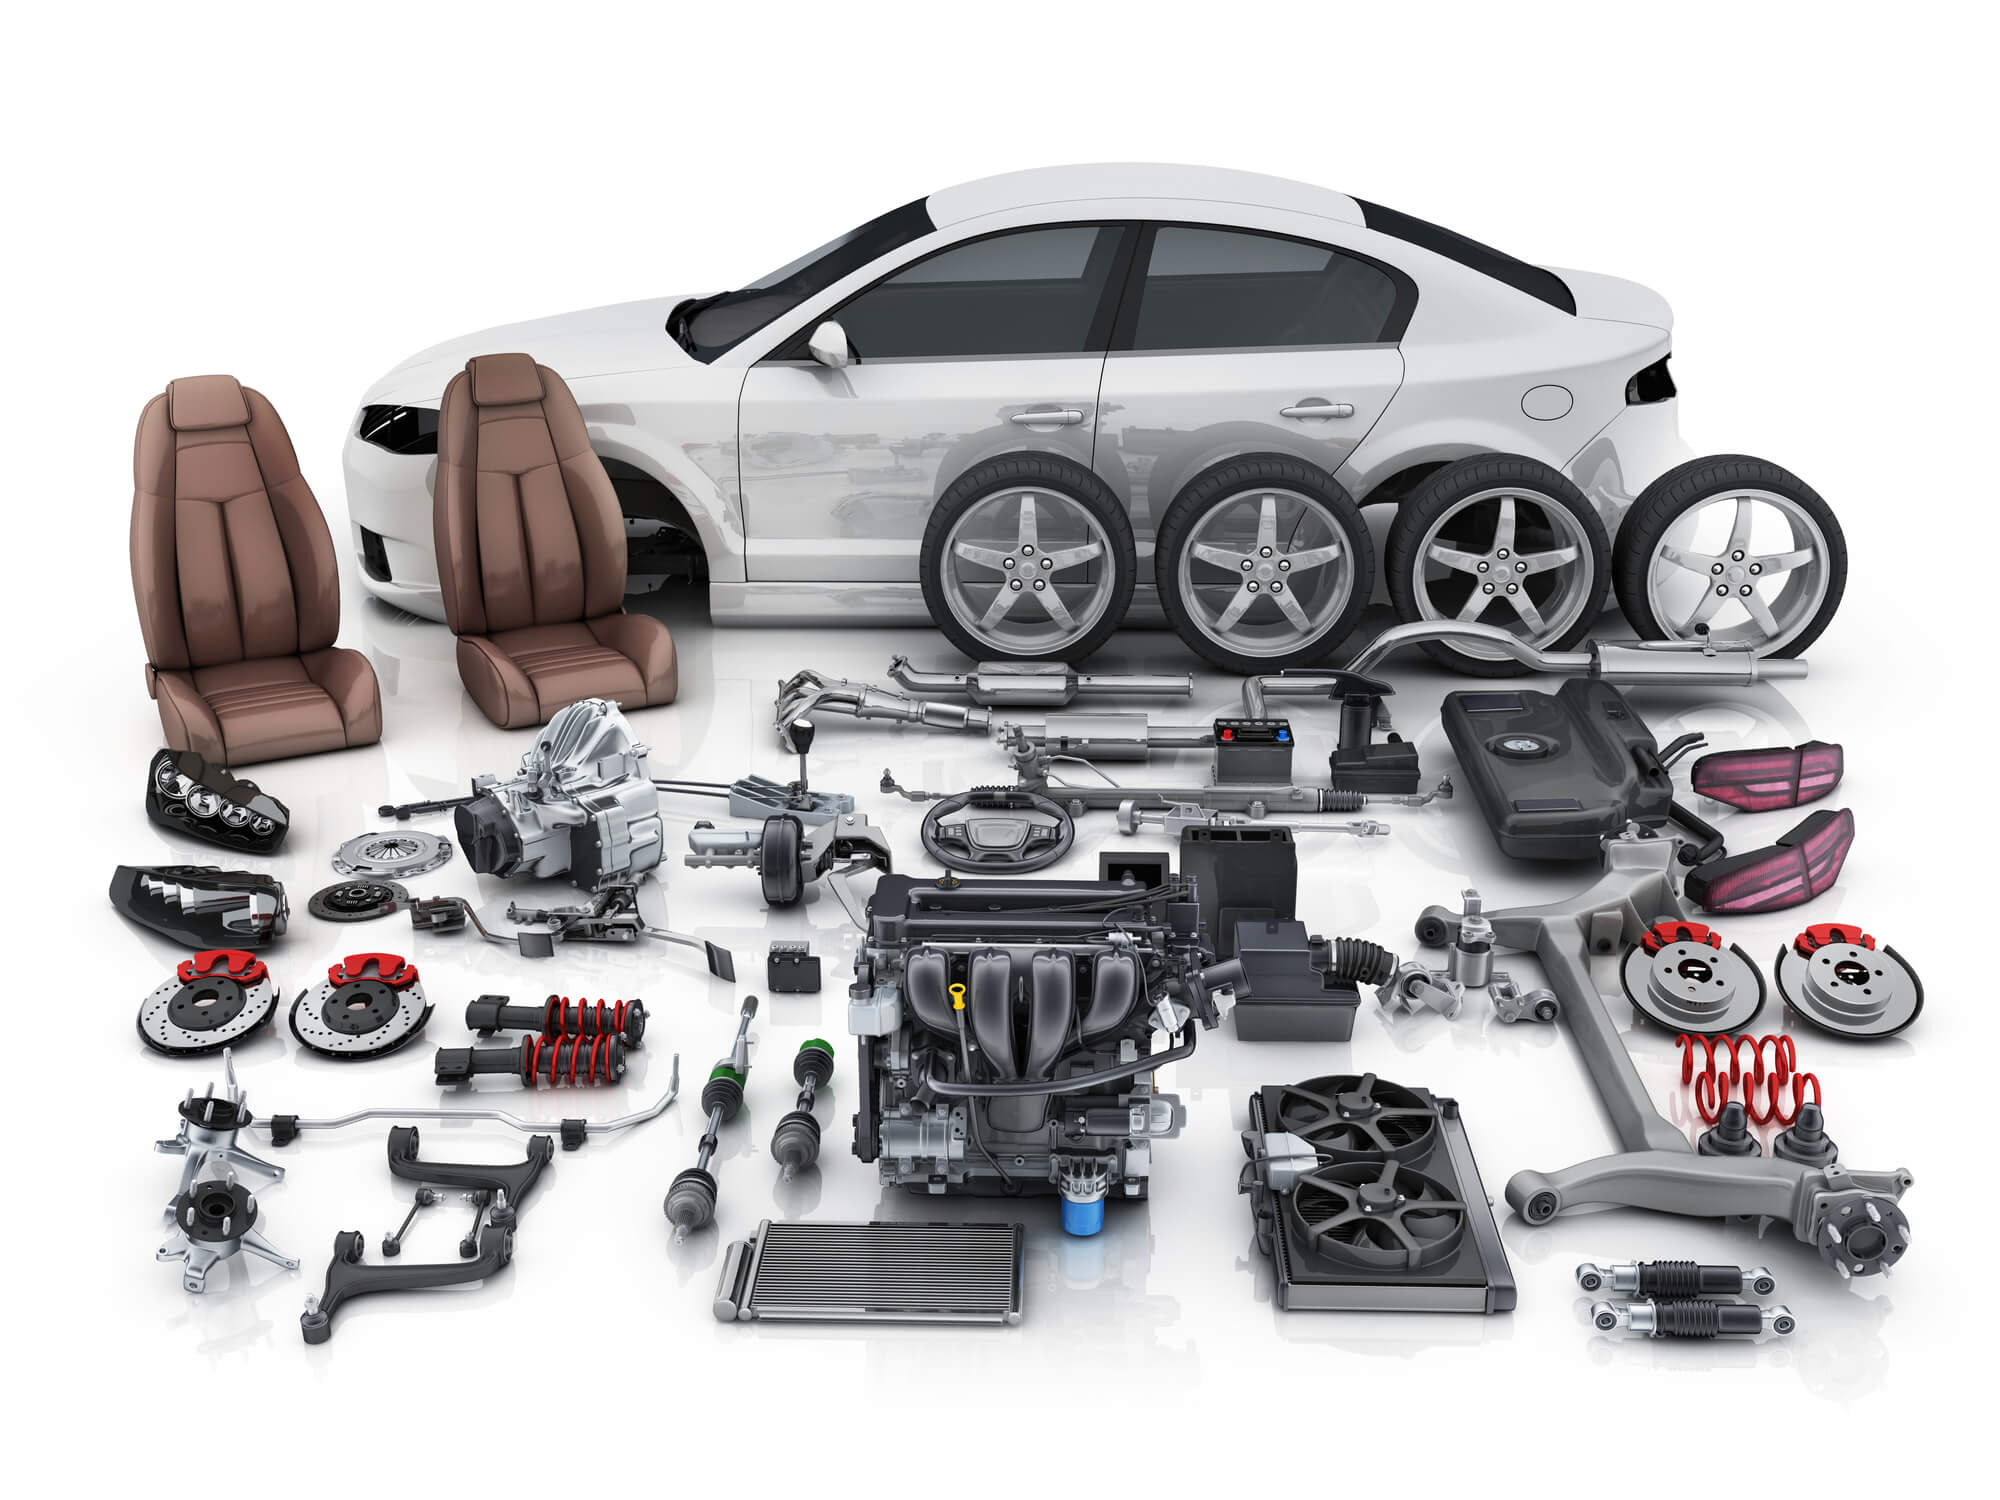 Selling Auto Parts Online Where And How To Get Started